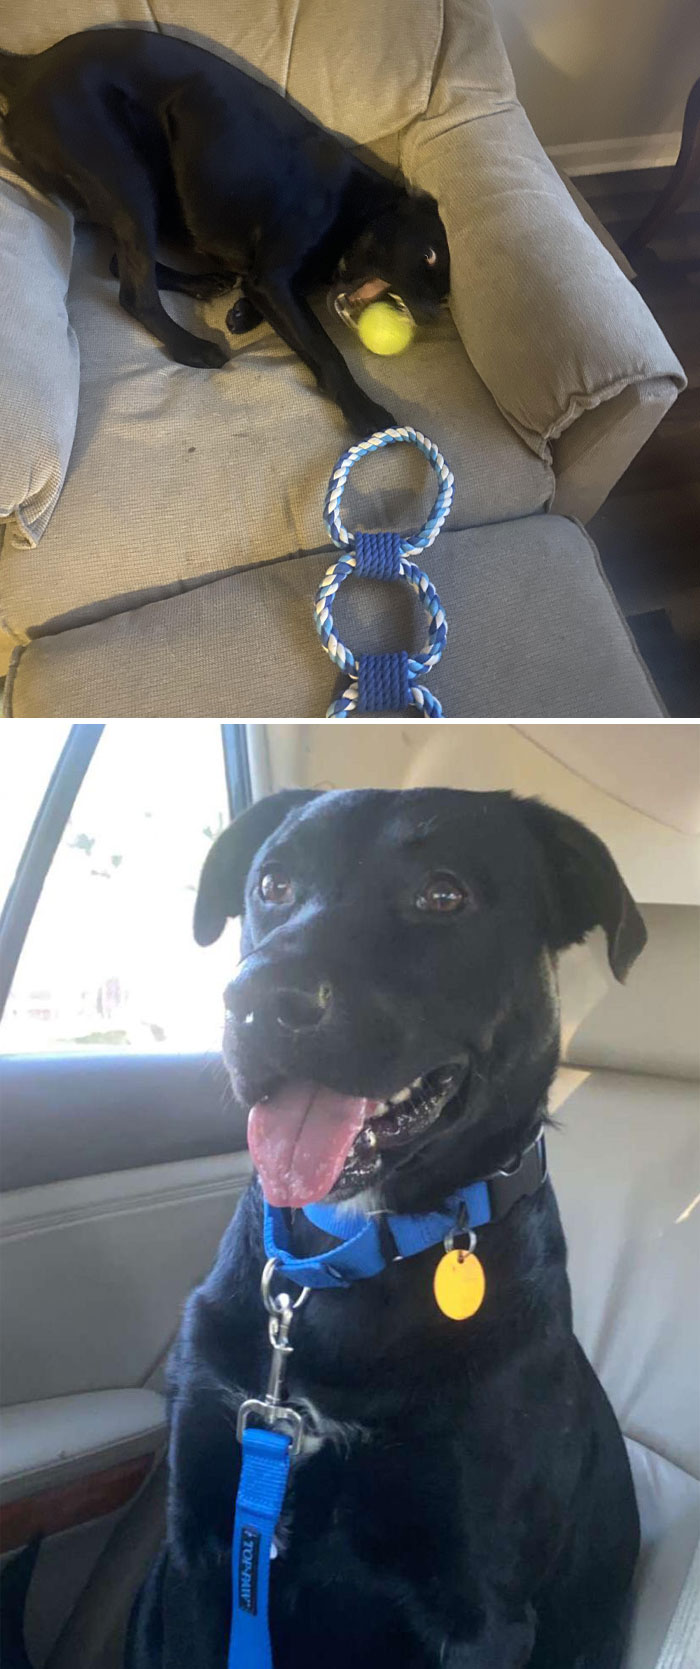 Adopted My First Dog Ever Today. I’ve Always Wanted A Labrador, This Lucky Guy Is Going To Be Spoiled Beyond Belief. Everyone Say Hello To Dirk!